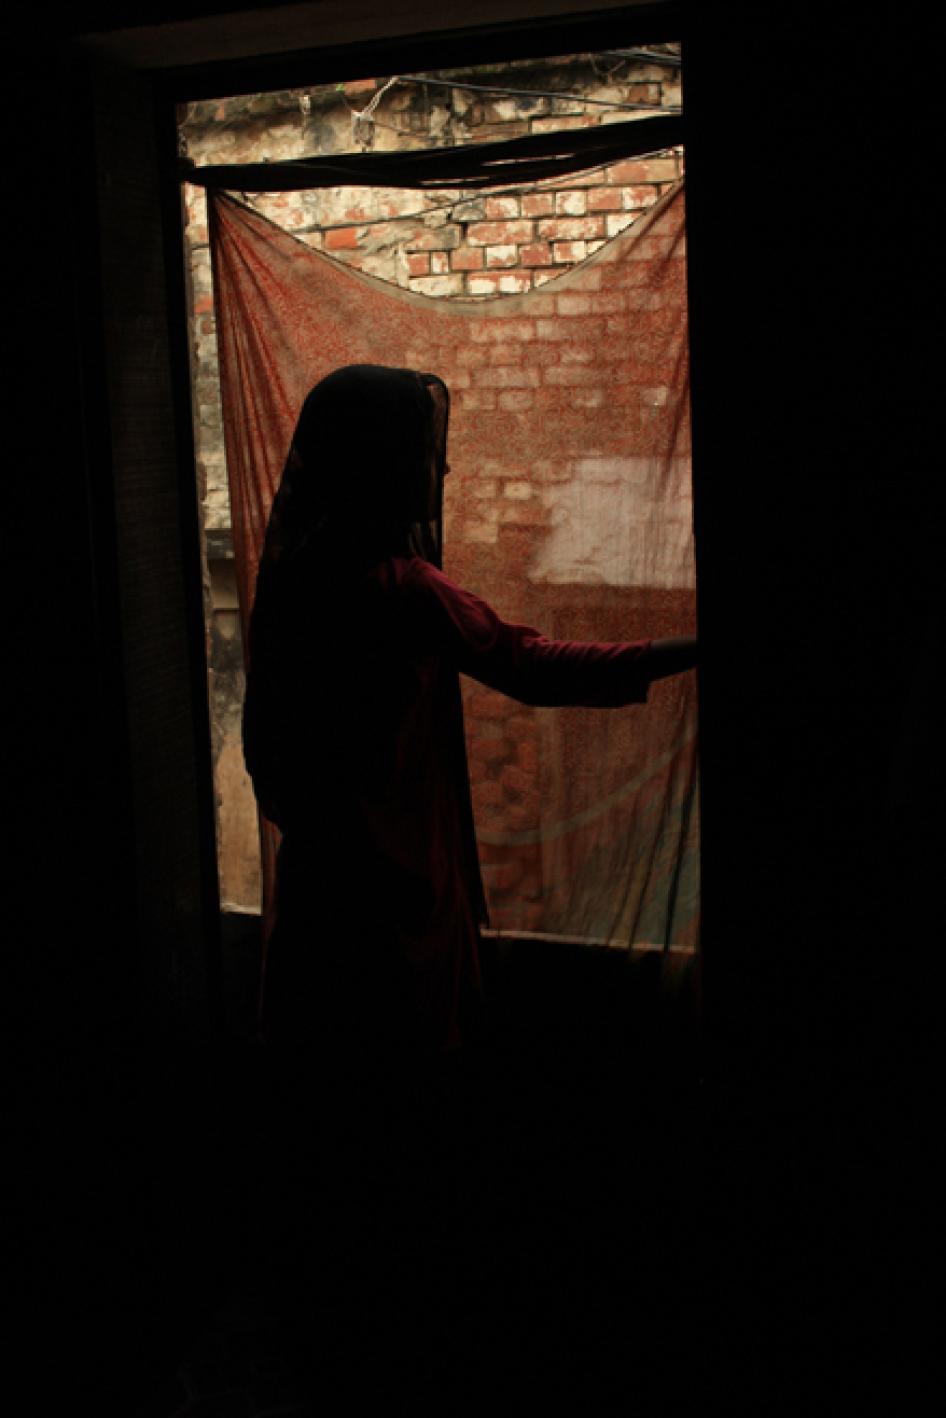 Mum And Son Hot Rape - South Asia Failing to Address Its Child Rape Problem | Human Rights Watch